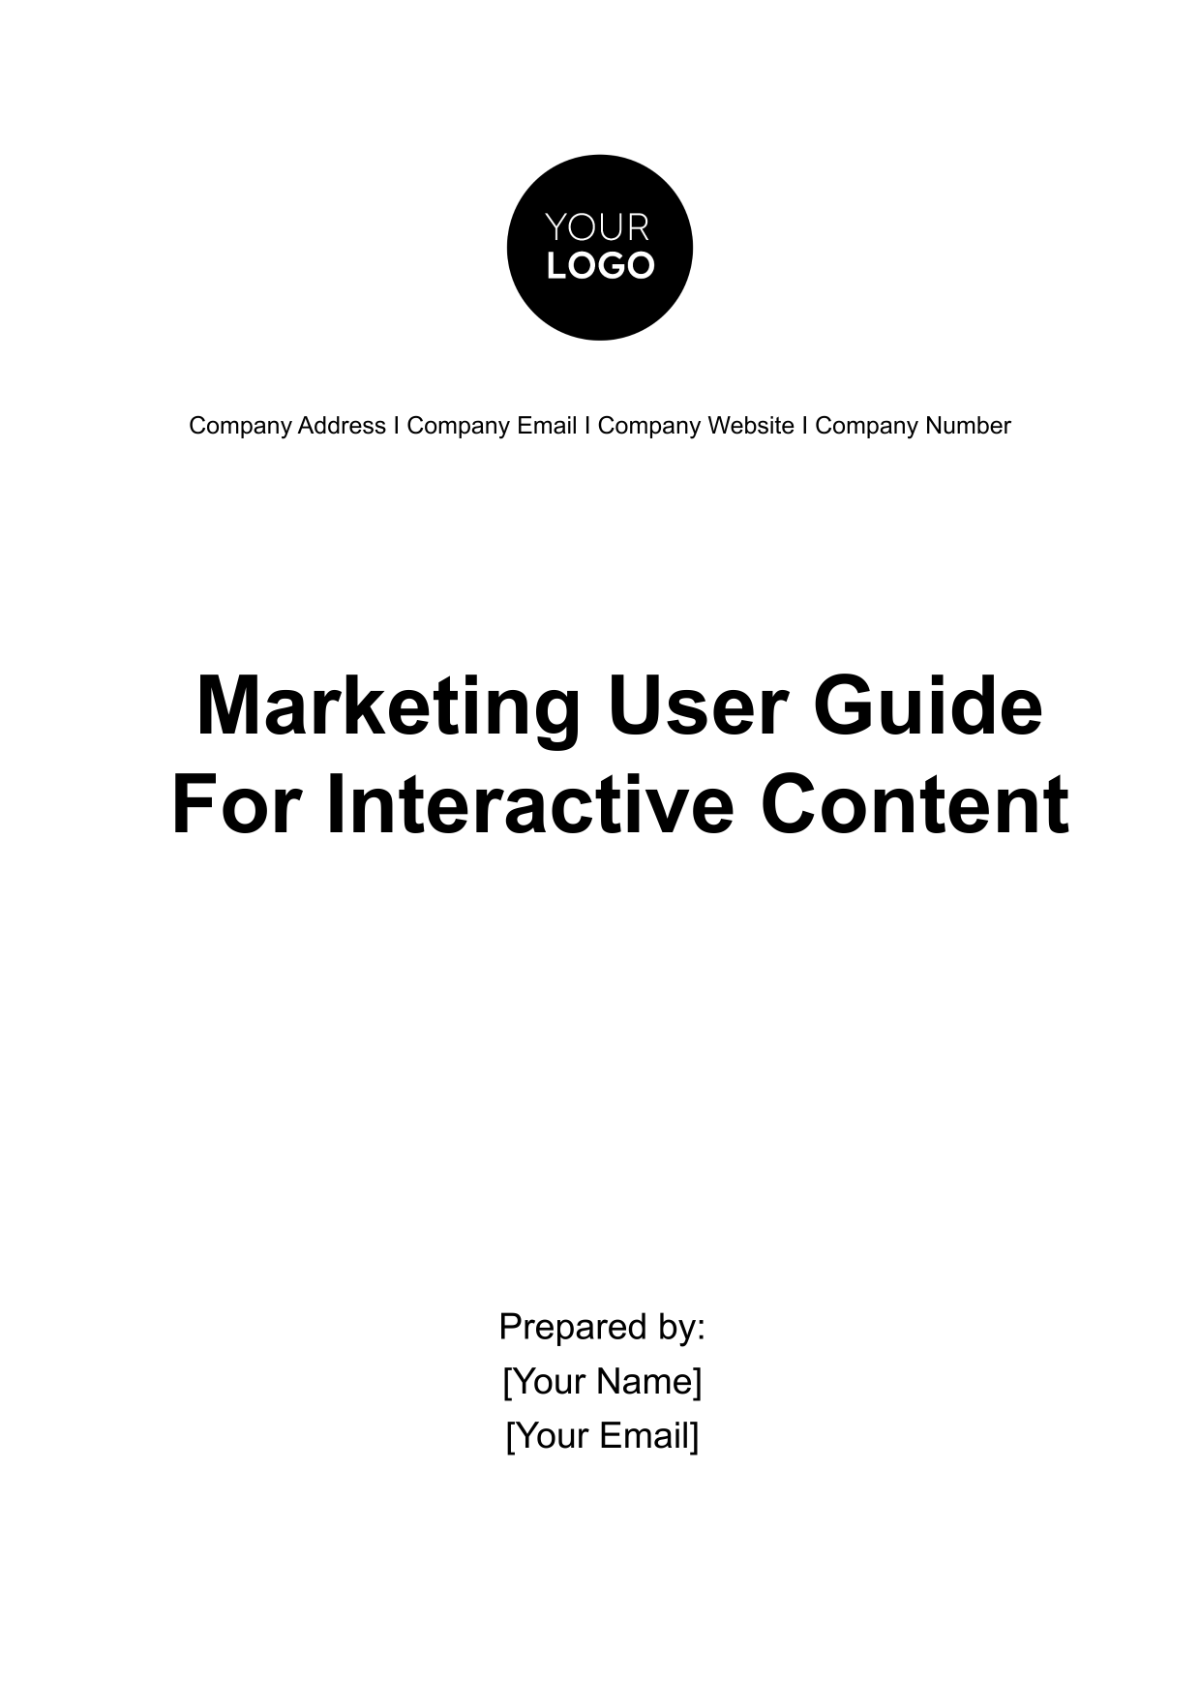 Marketing User Guide for Interactive Content Template